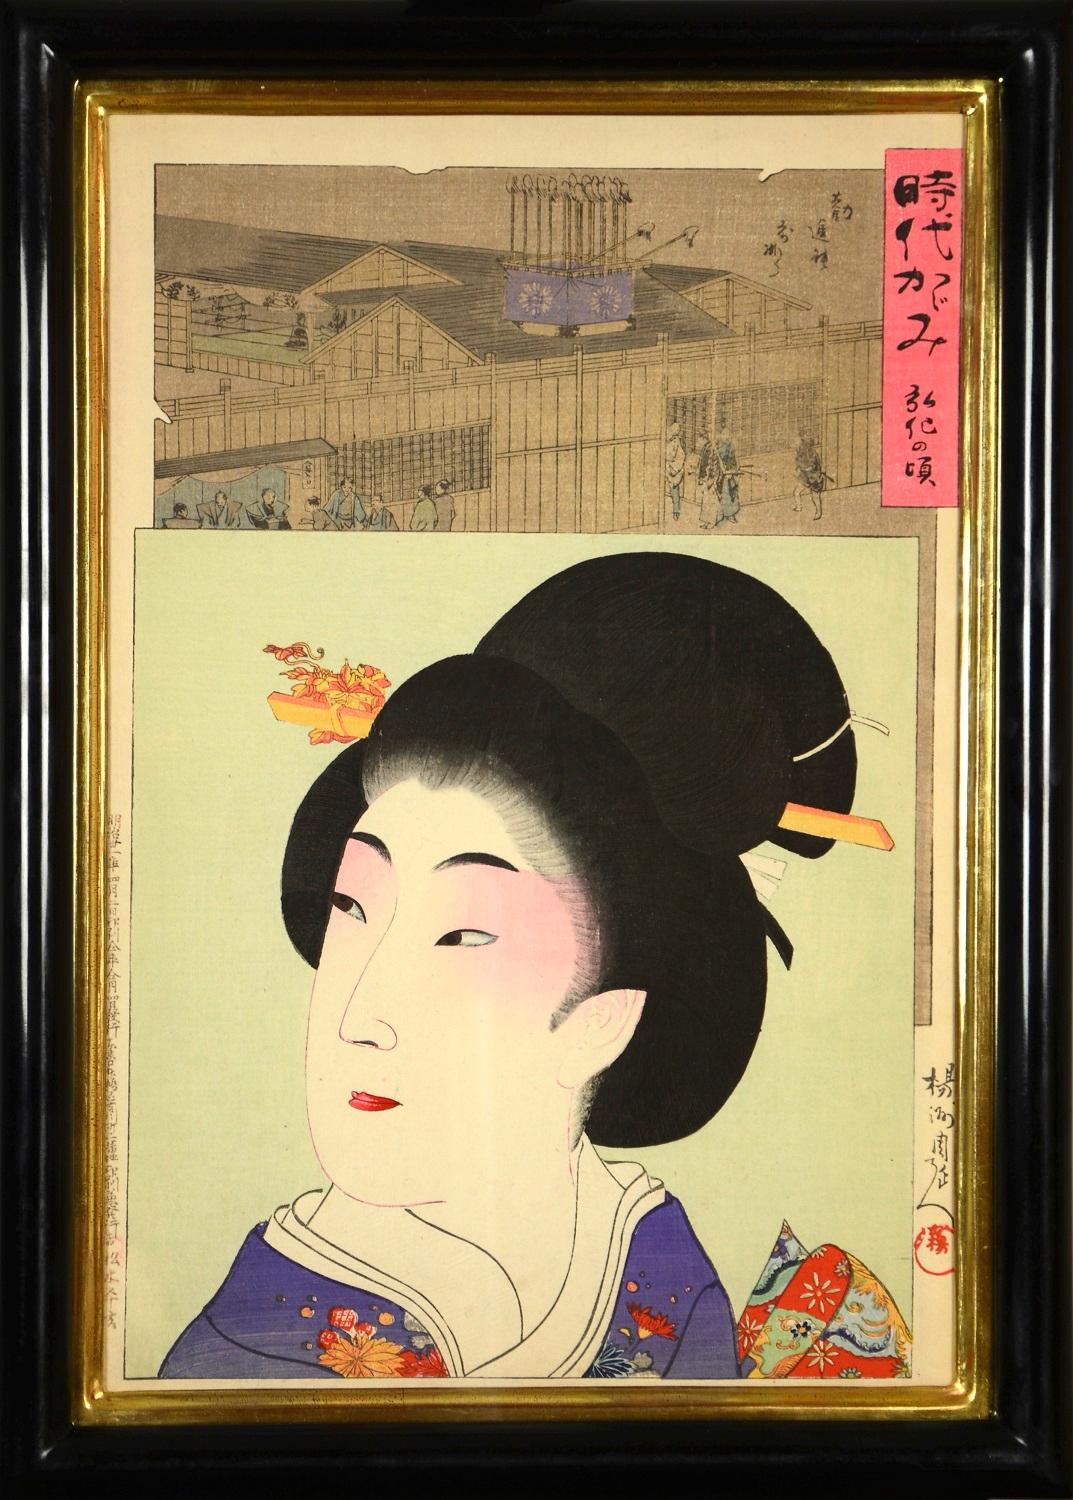 A Group of Six Bust Portraits of Beauties - Jidai Kagami (Mirror of the Ages). - Print by CHIKANOBU, Yoshu